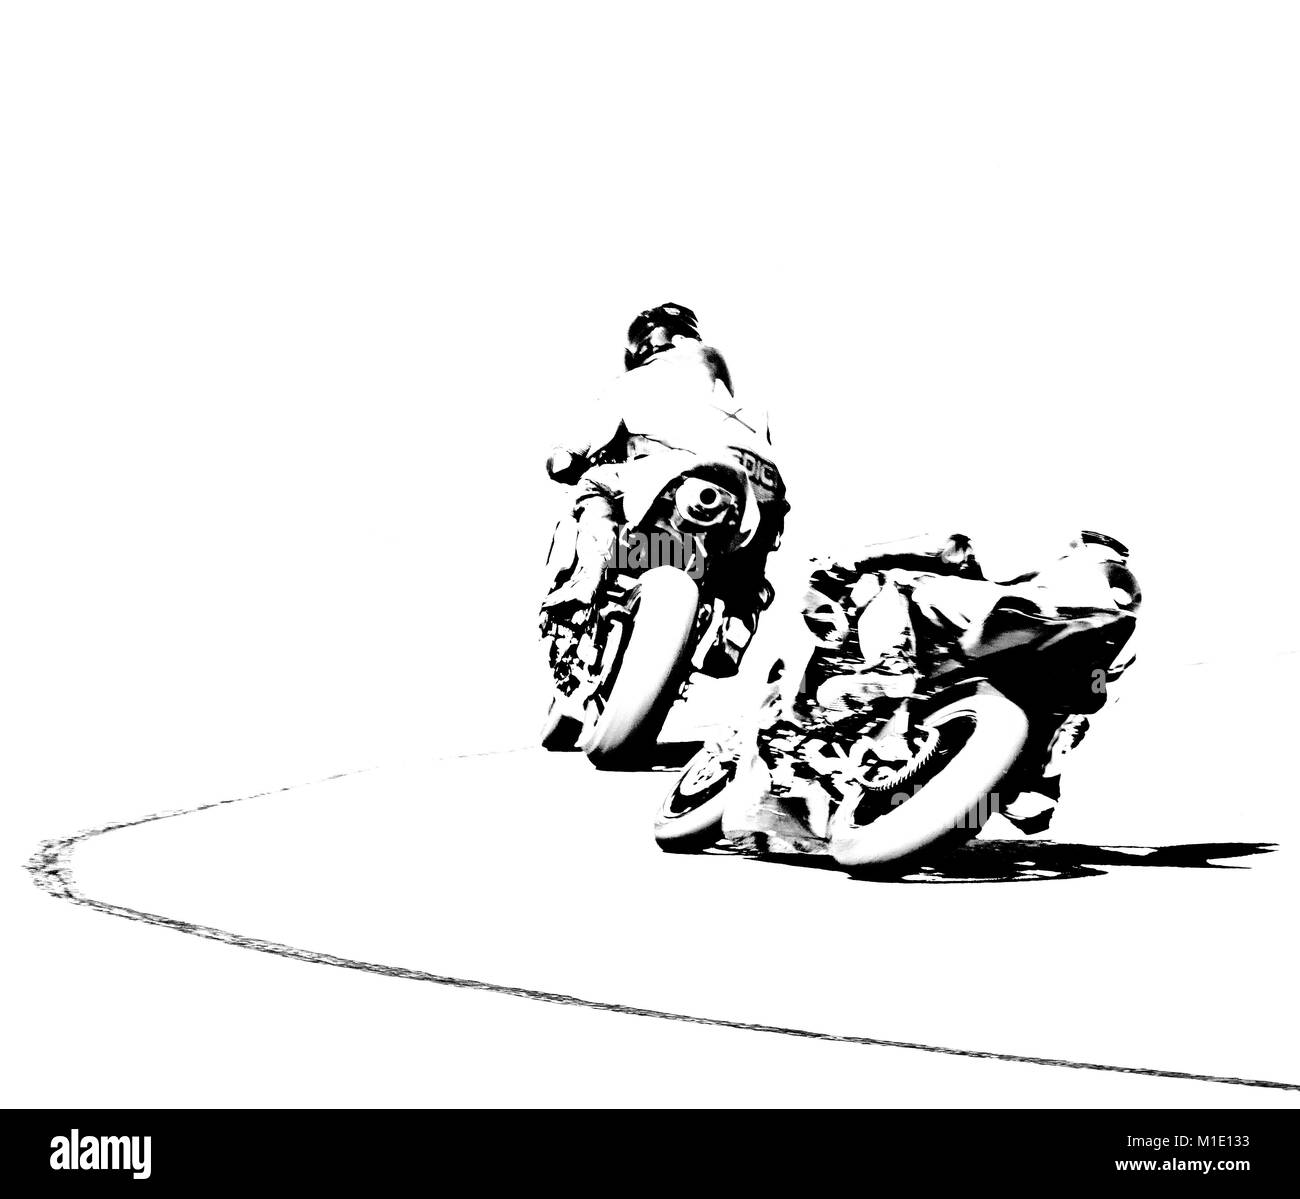 Artistic abstract motorcycles Stock Photo